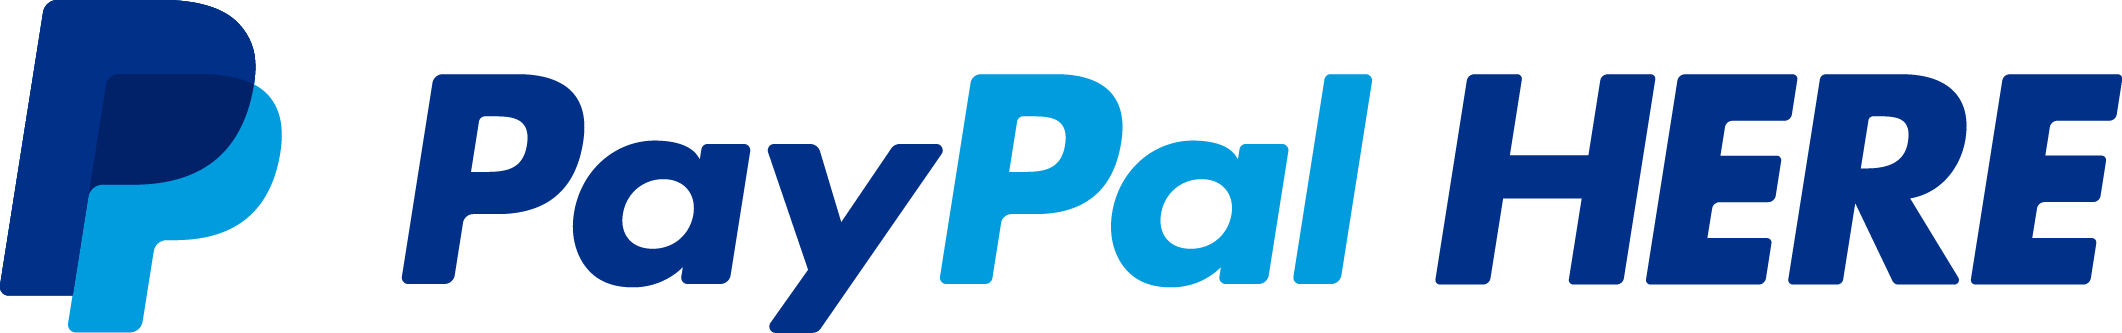 PayPal Accepted Logo - Sign Up For PayPal Here